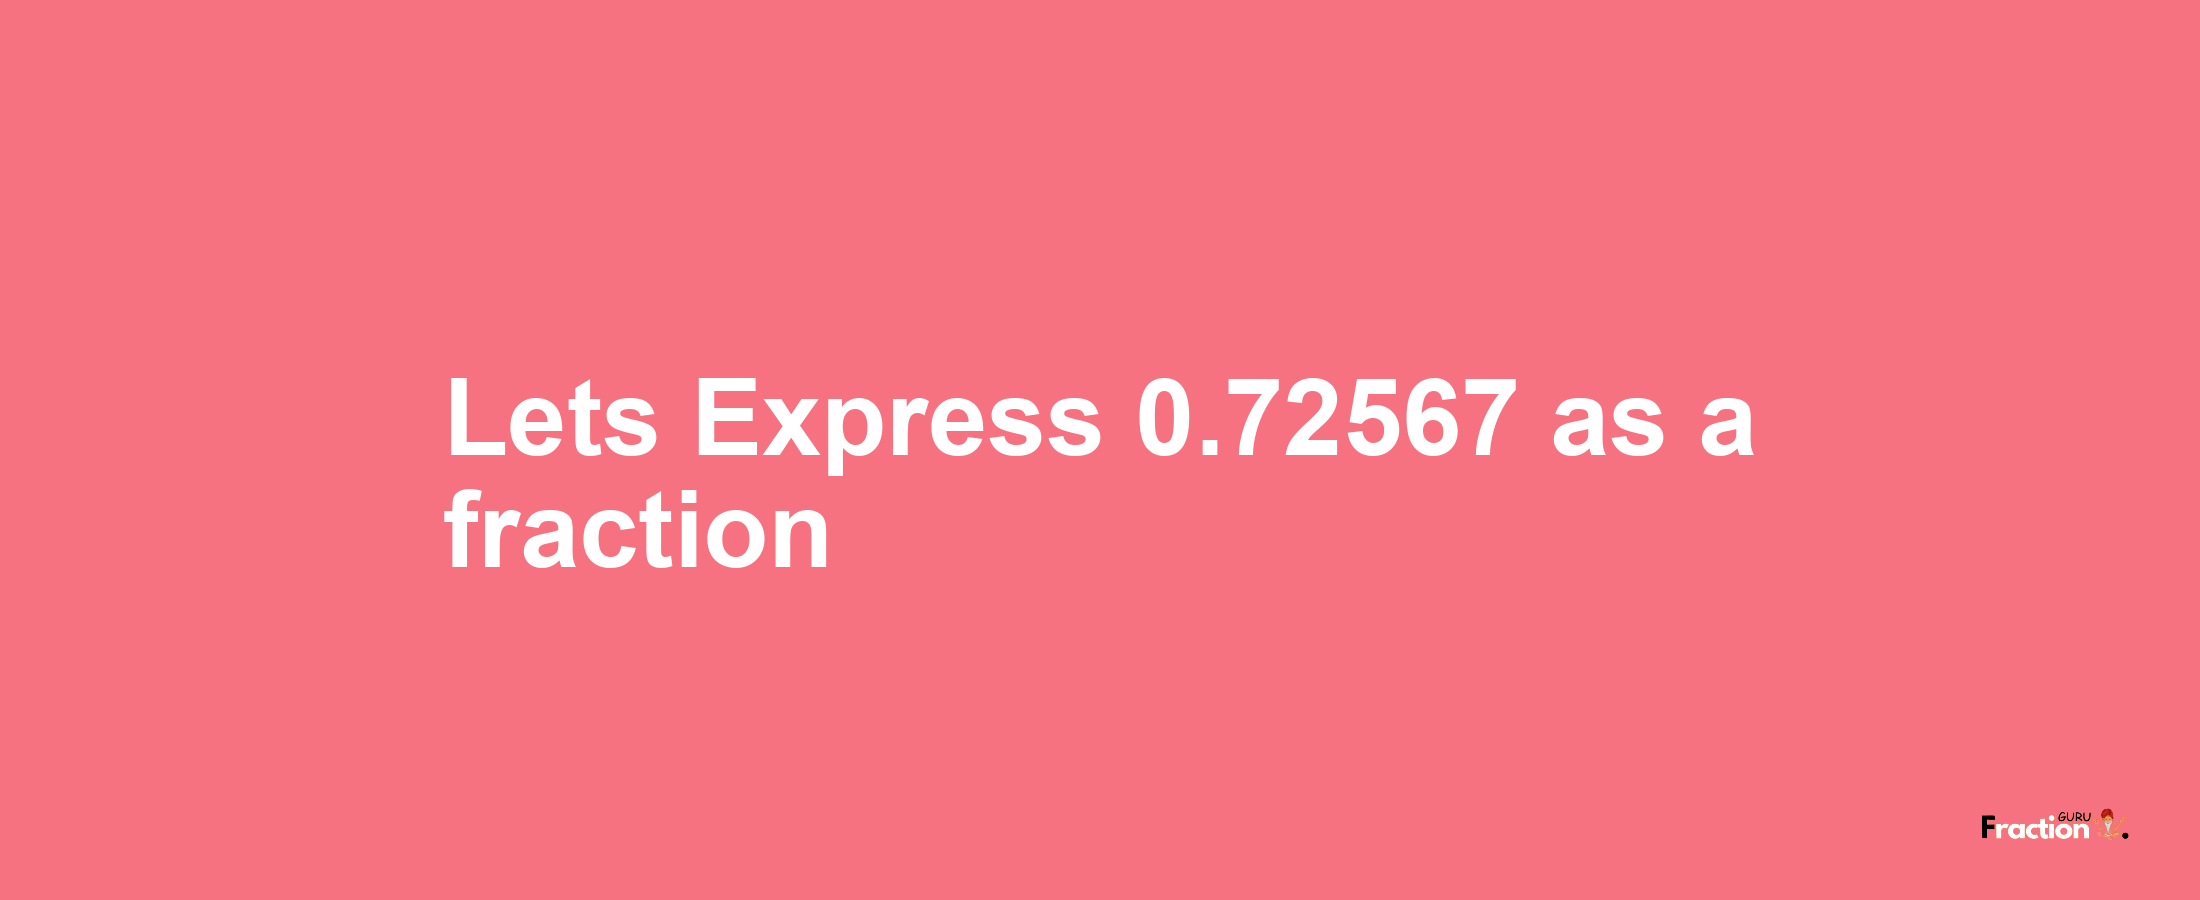 Lets Express 0.72567 as afraction